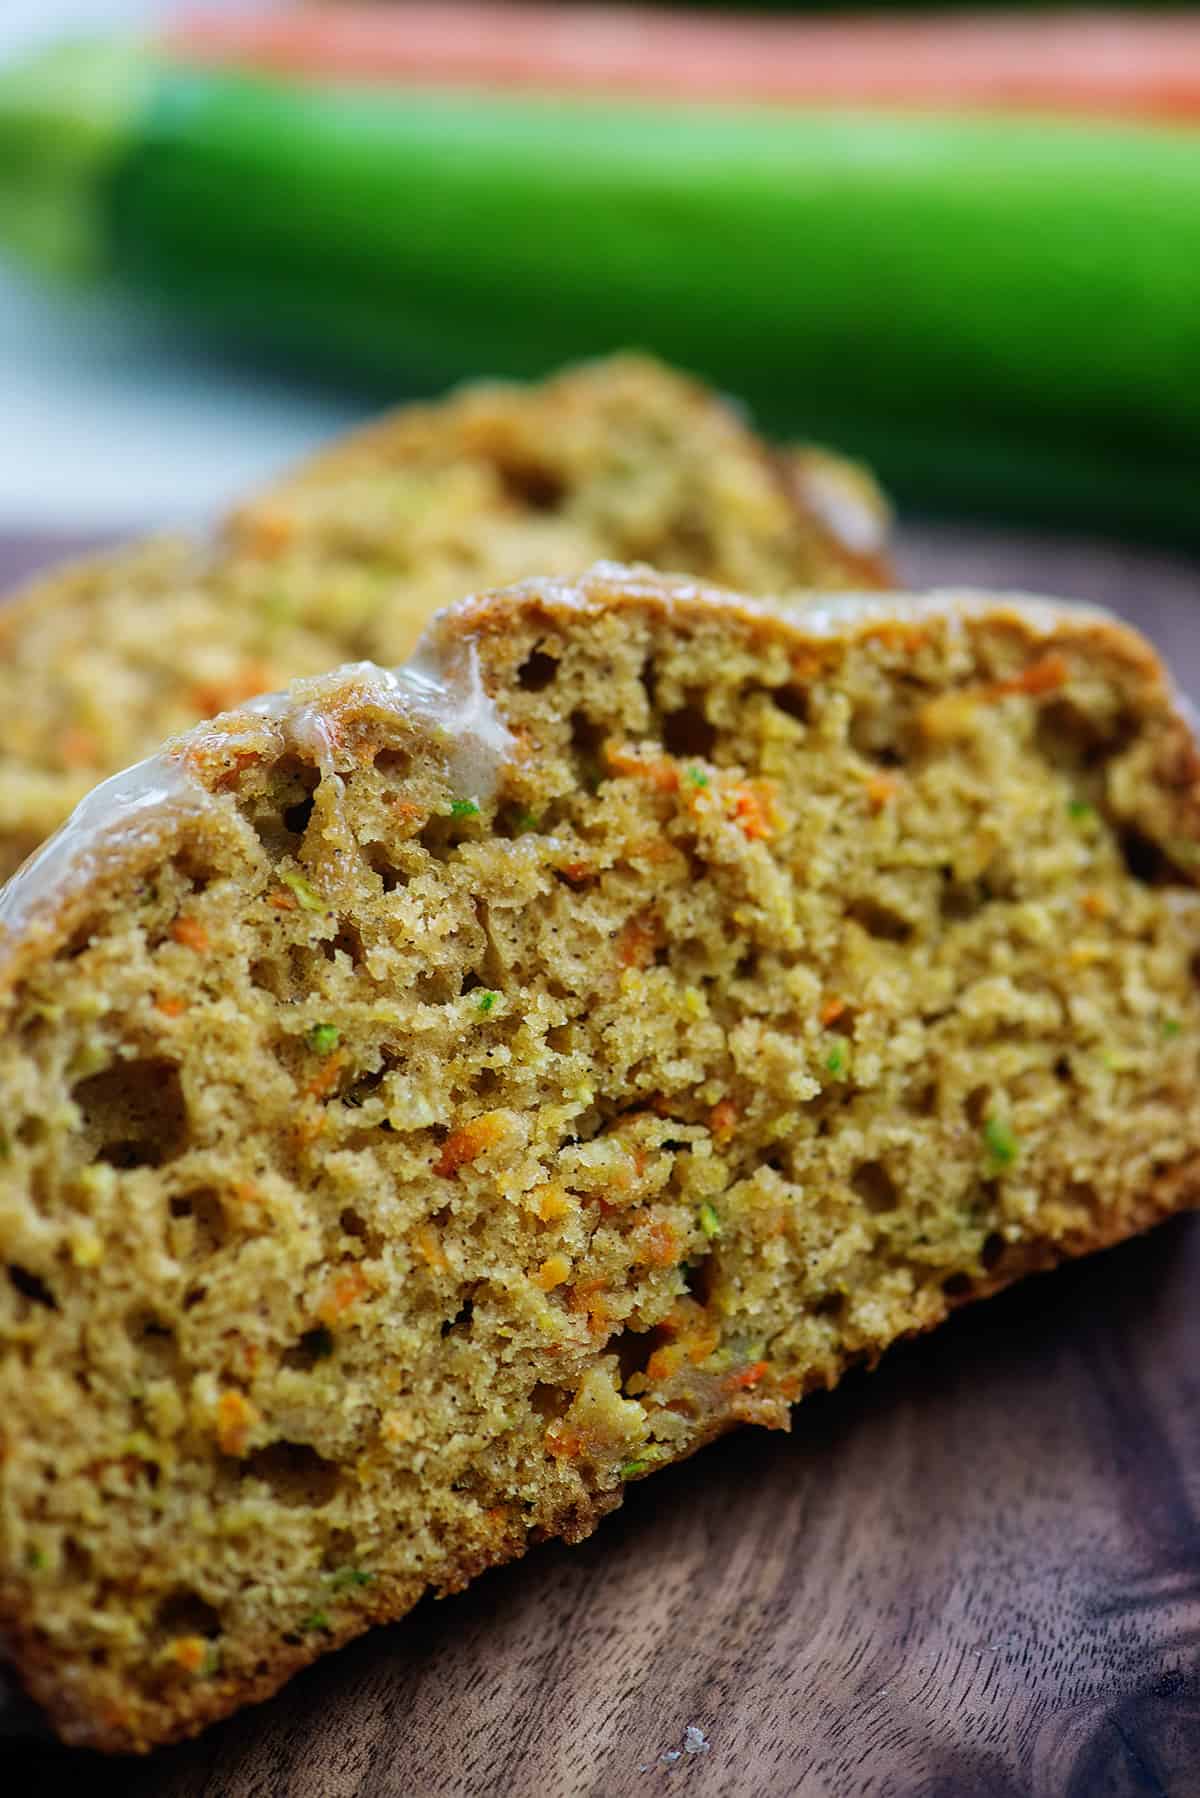 The Top 15 Carrot Zucchini Bread Top 15 Recipes Of All Time